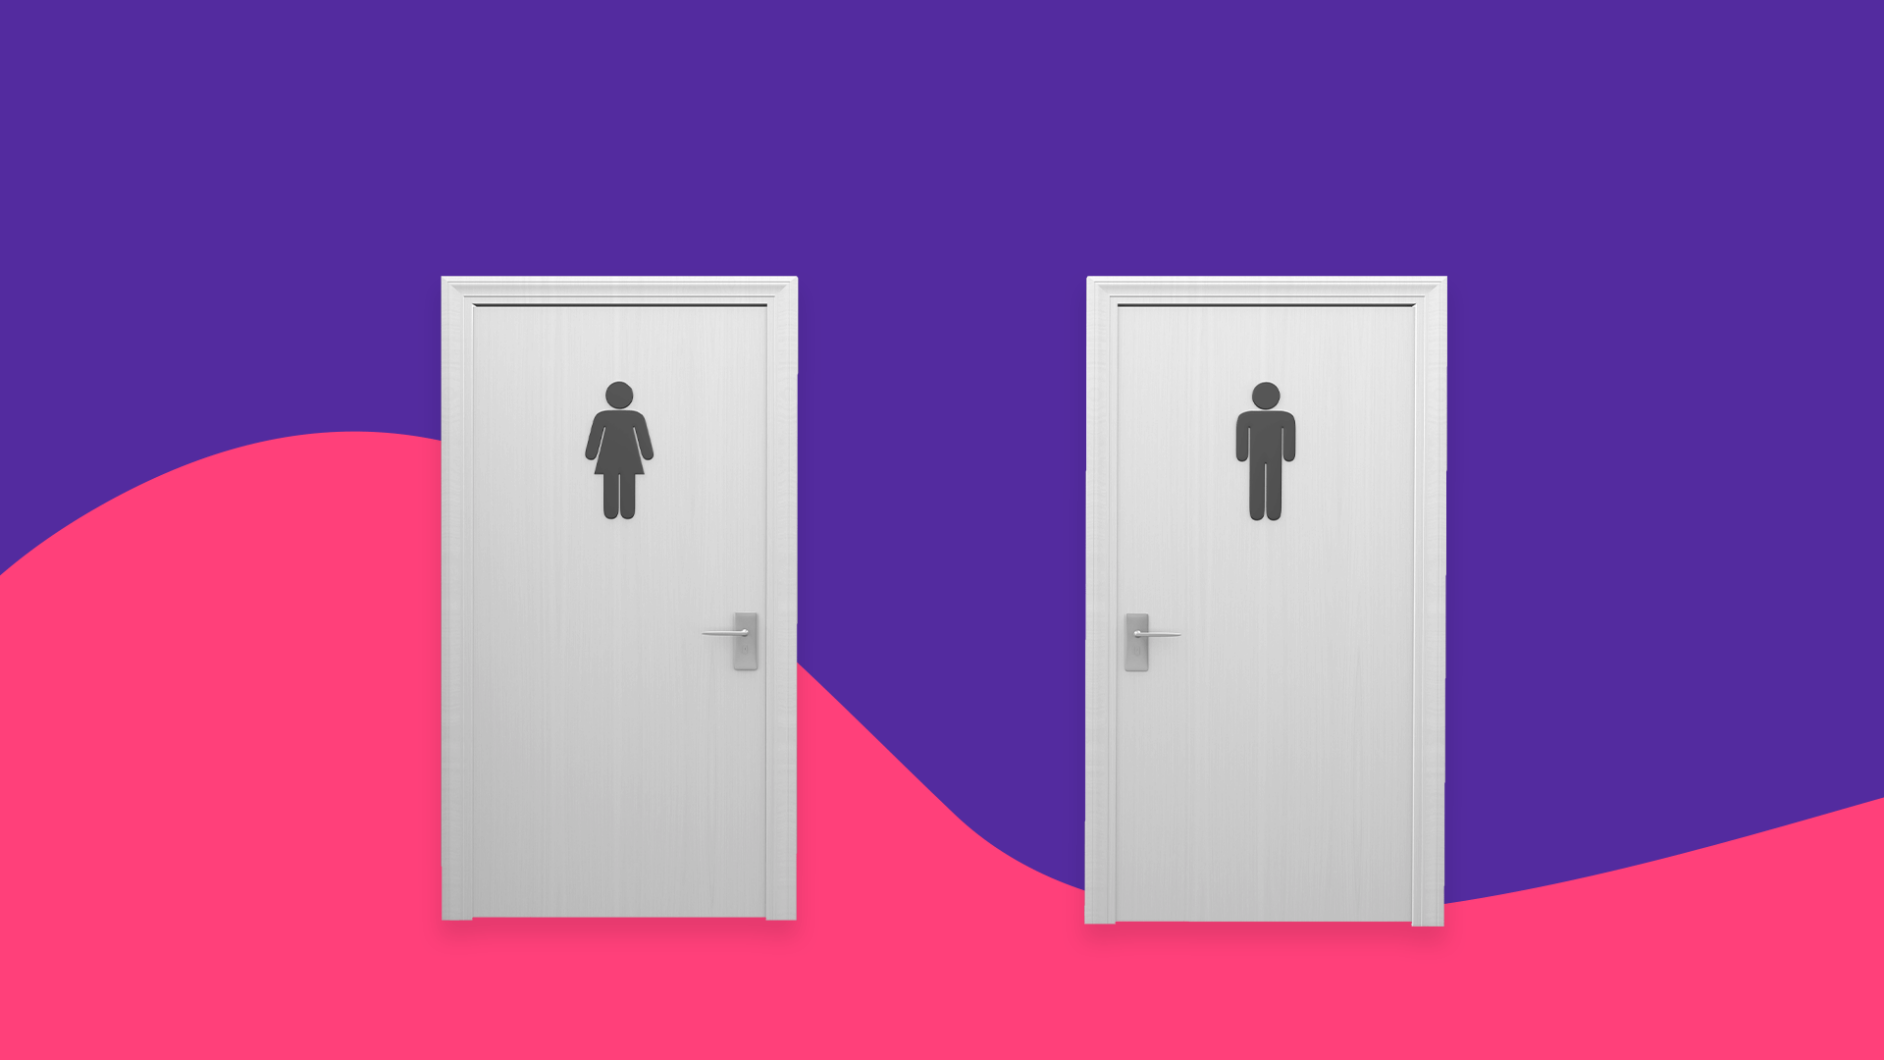 Two bathroom doors: one male and one female